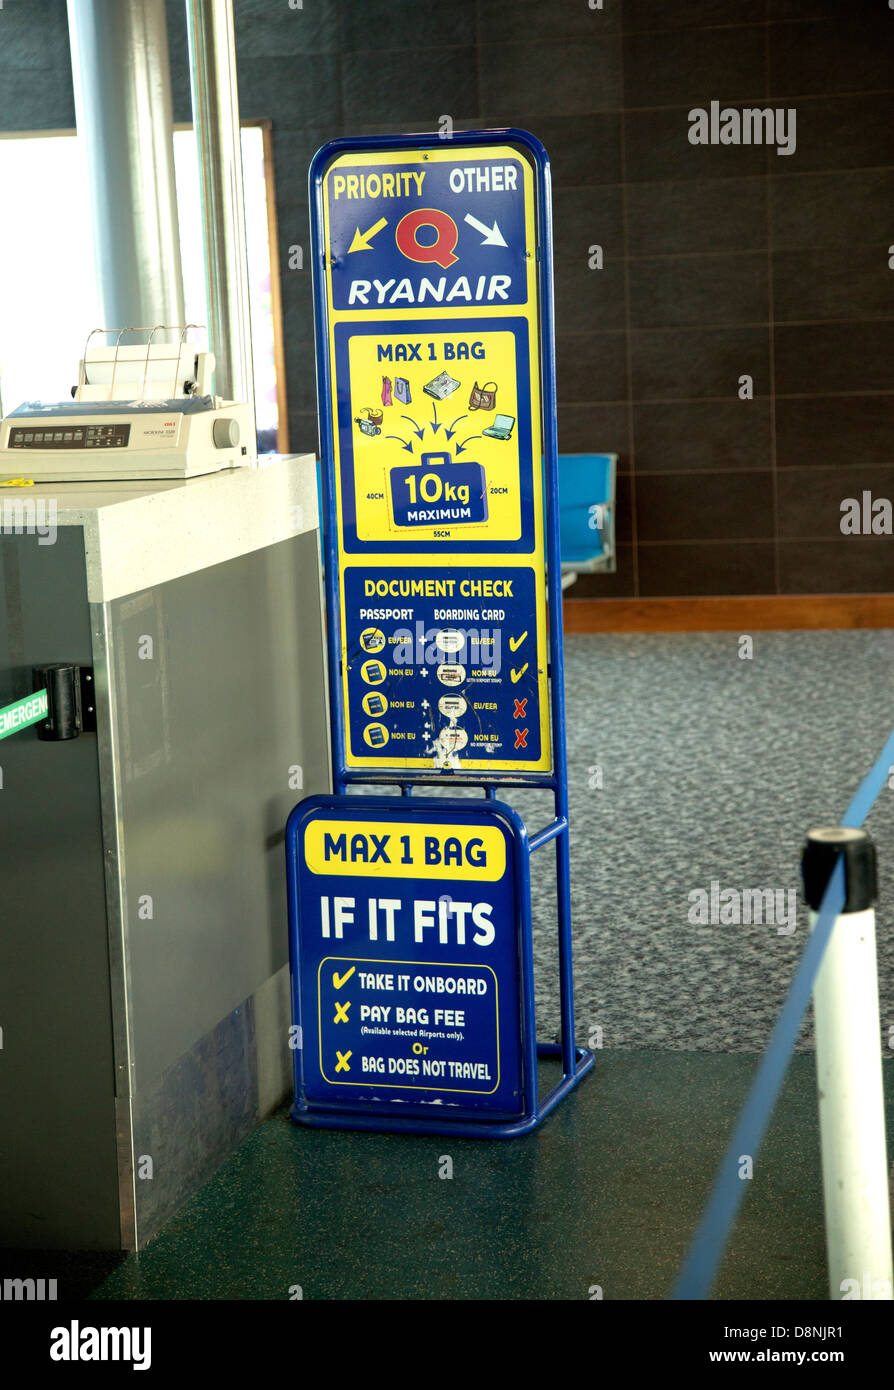 Cabin baggage sizes restrictions on Ryanair flight Stock Photo, Royalty Free Image: 57024101 - Alamy